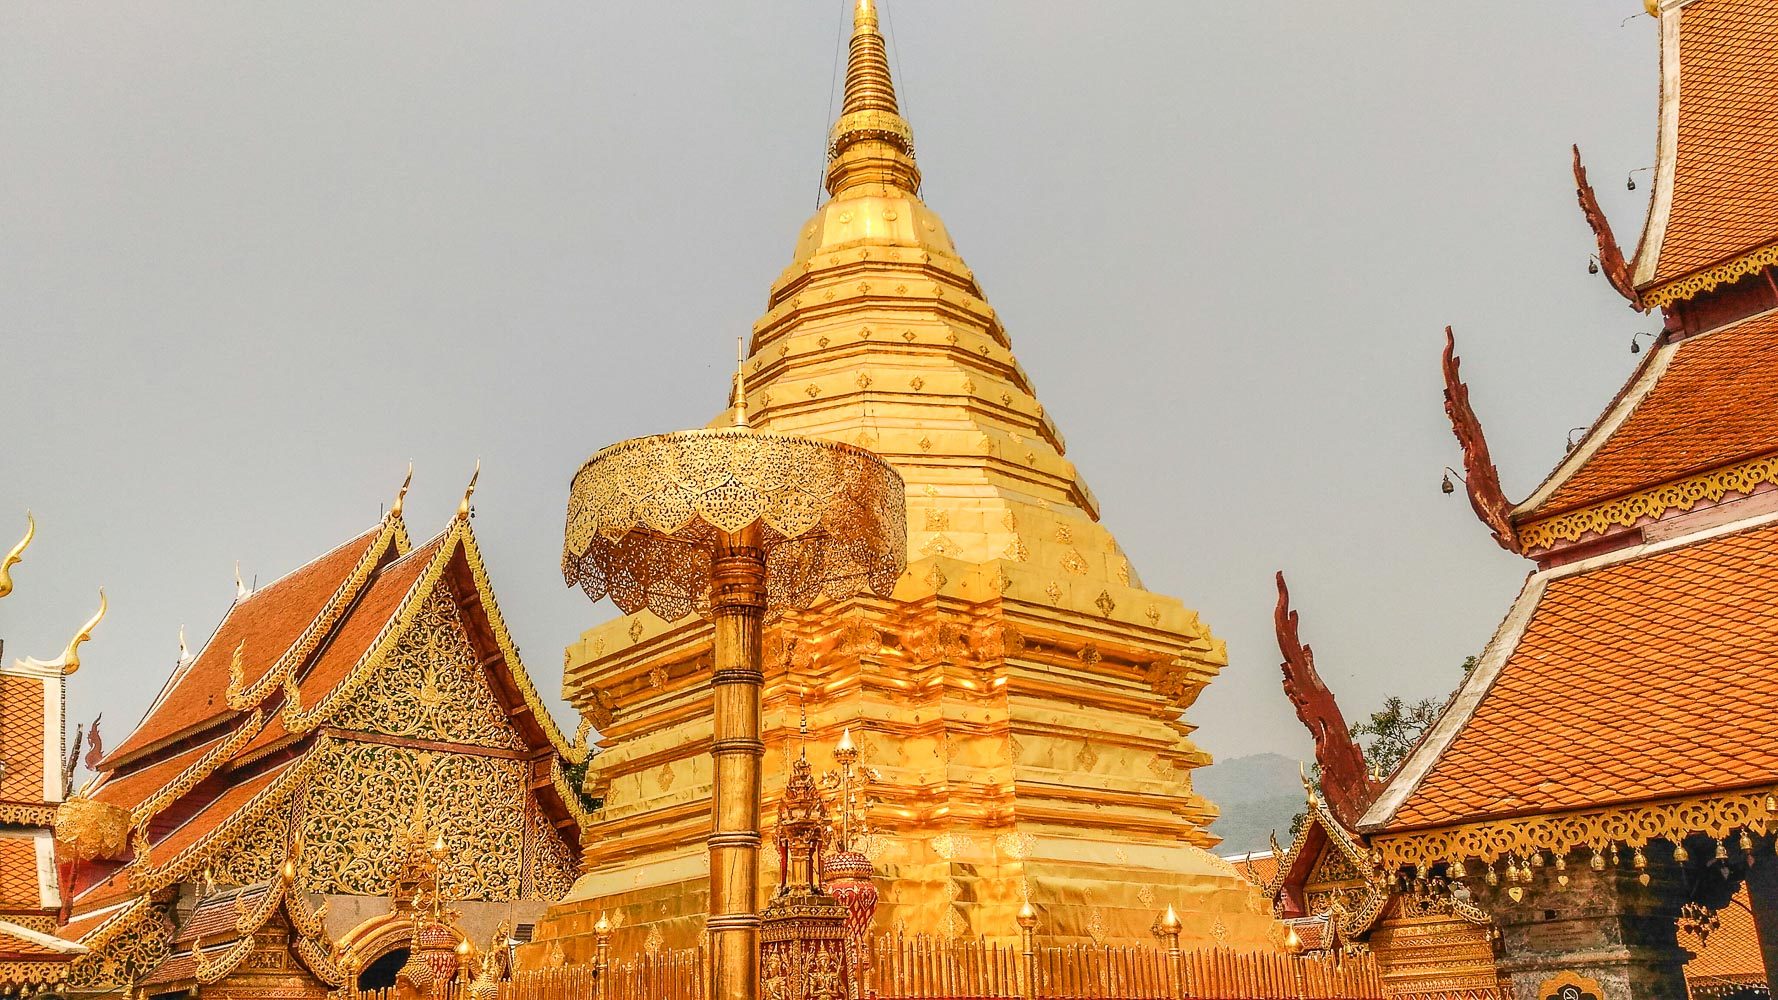 One of the most popular temple in all of Thailand 